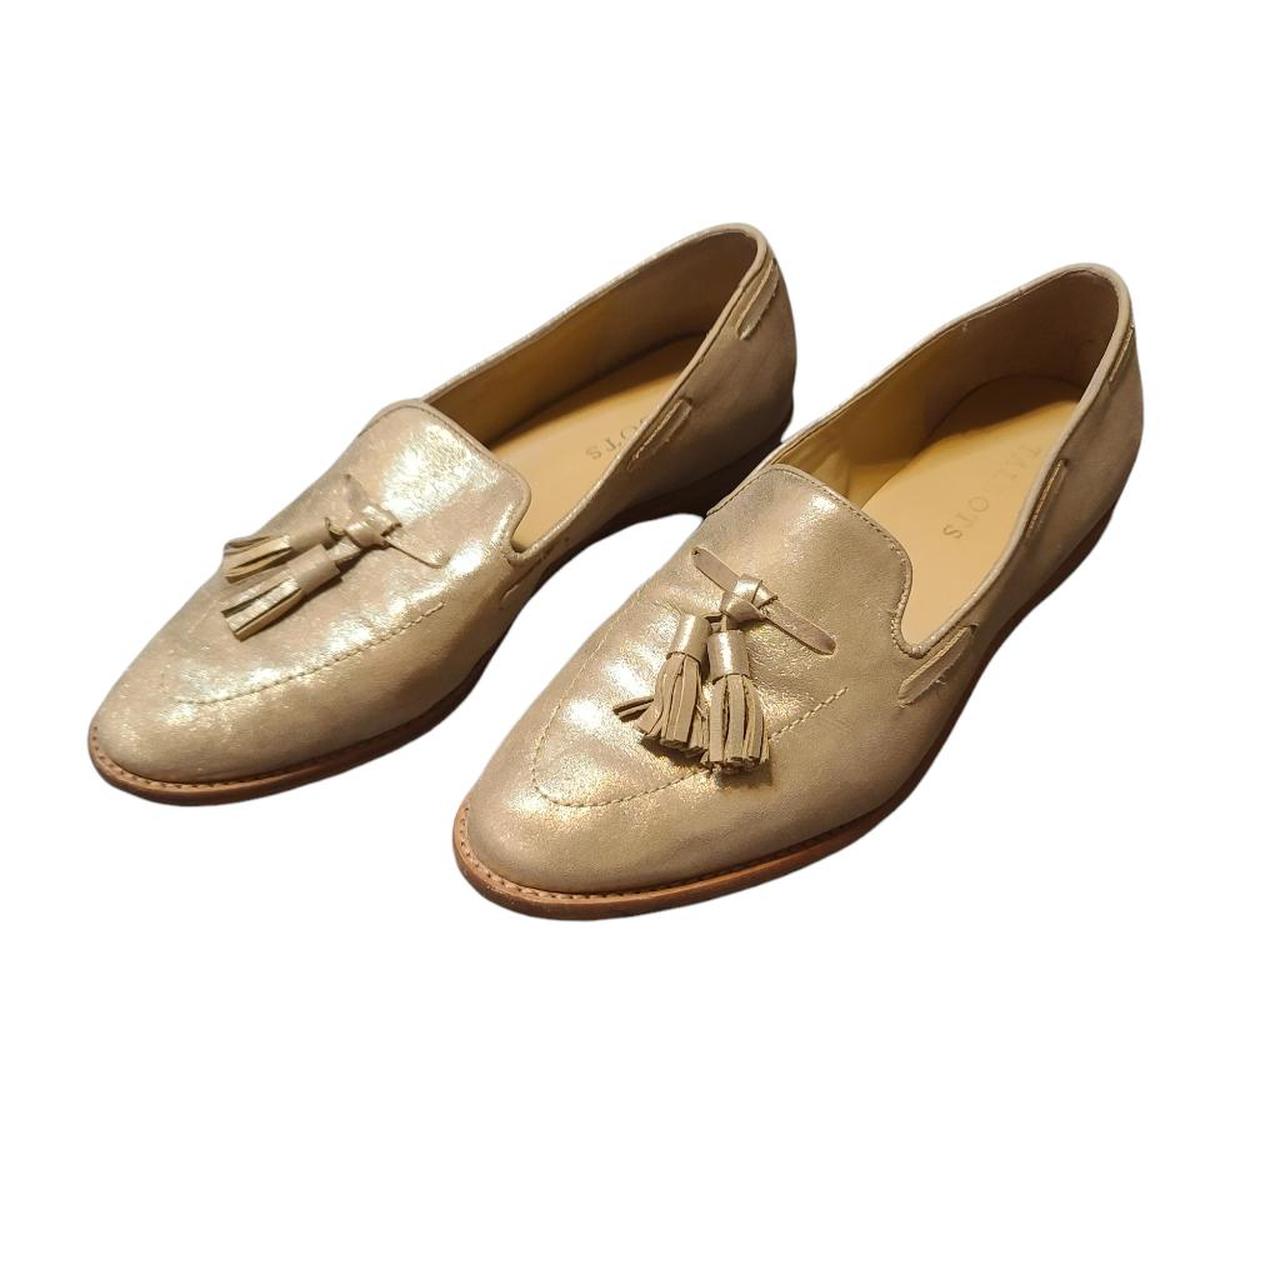 Talbots Women's Gold and Tan Loafers | Depop